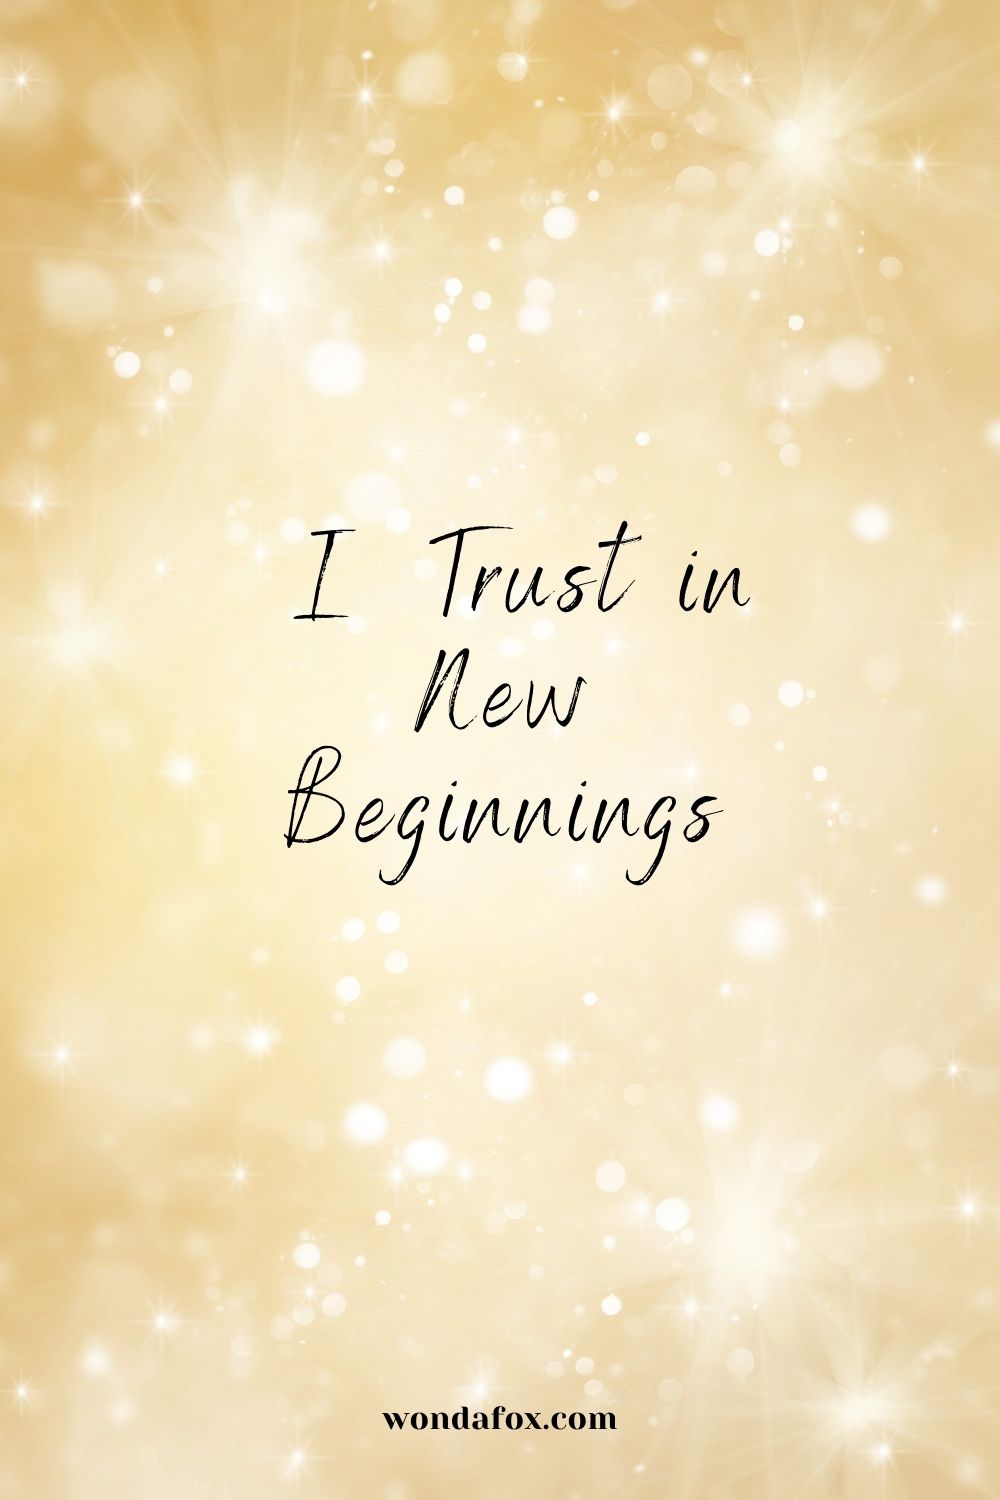  I trust in new beginnings - mantras for new year